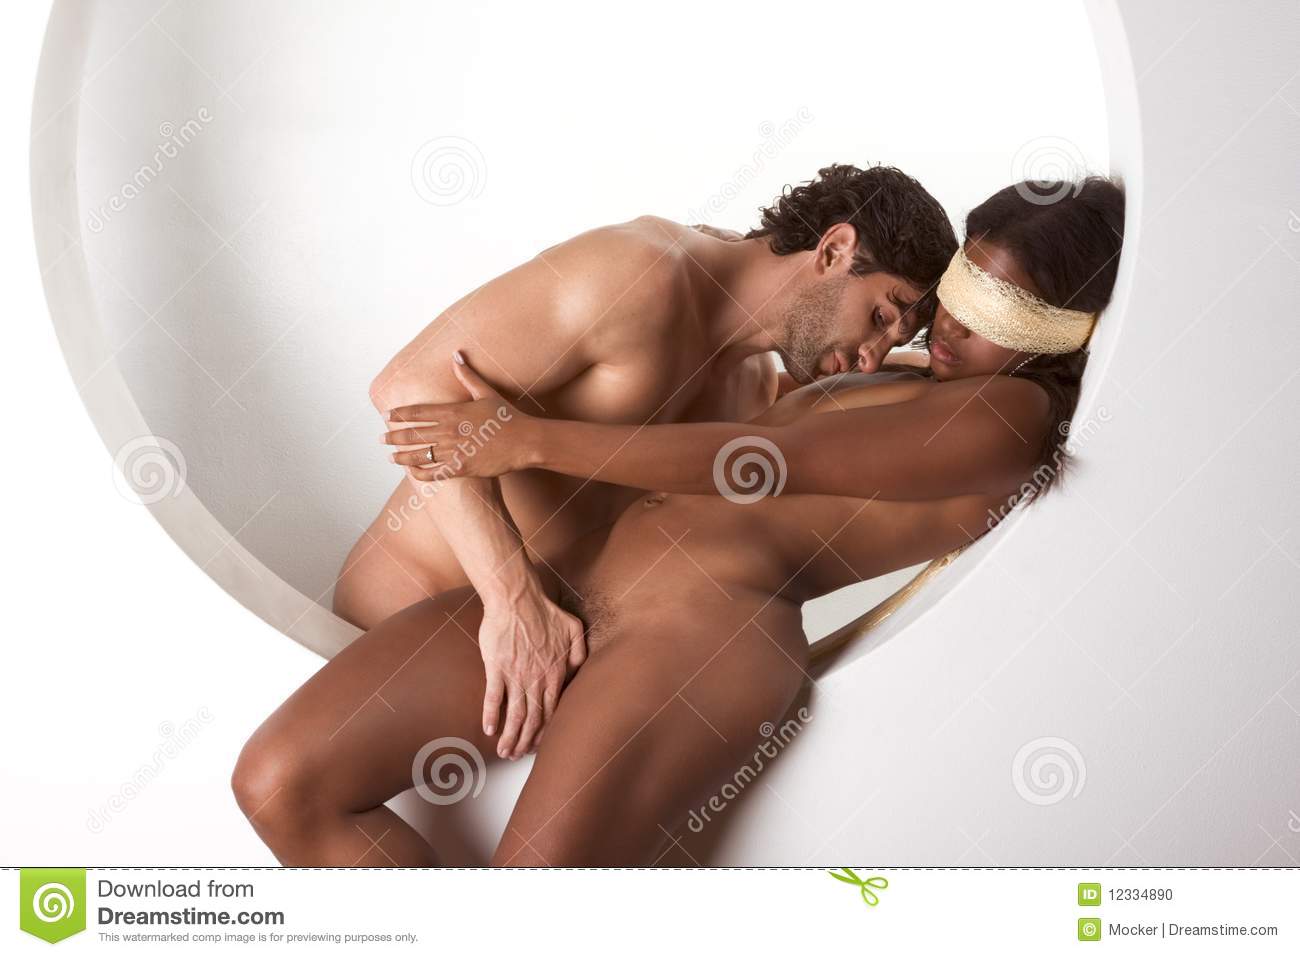 best of Woman and nudist Interracial man